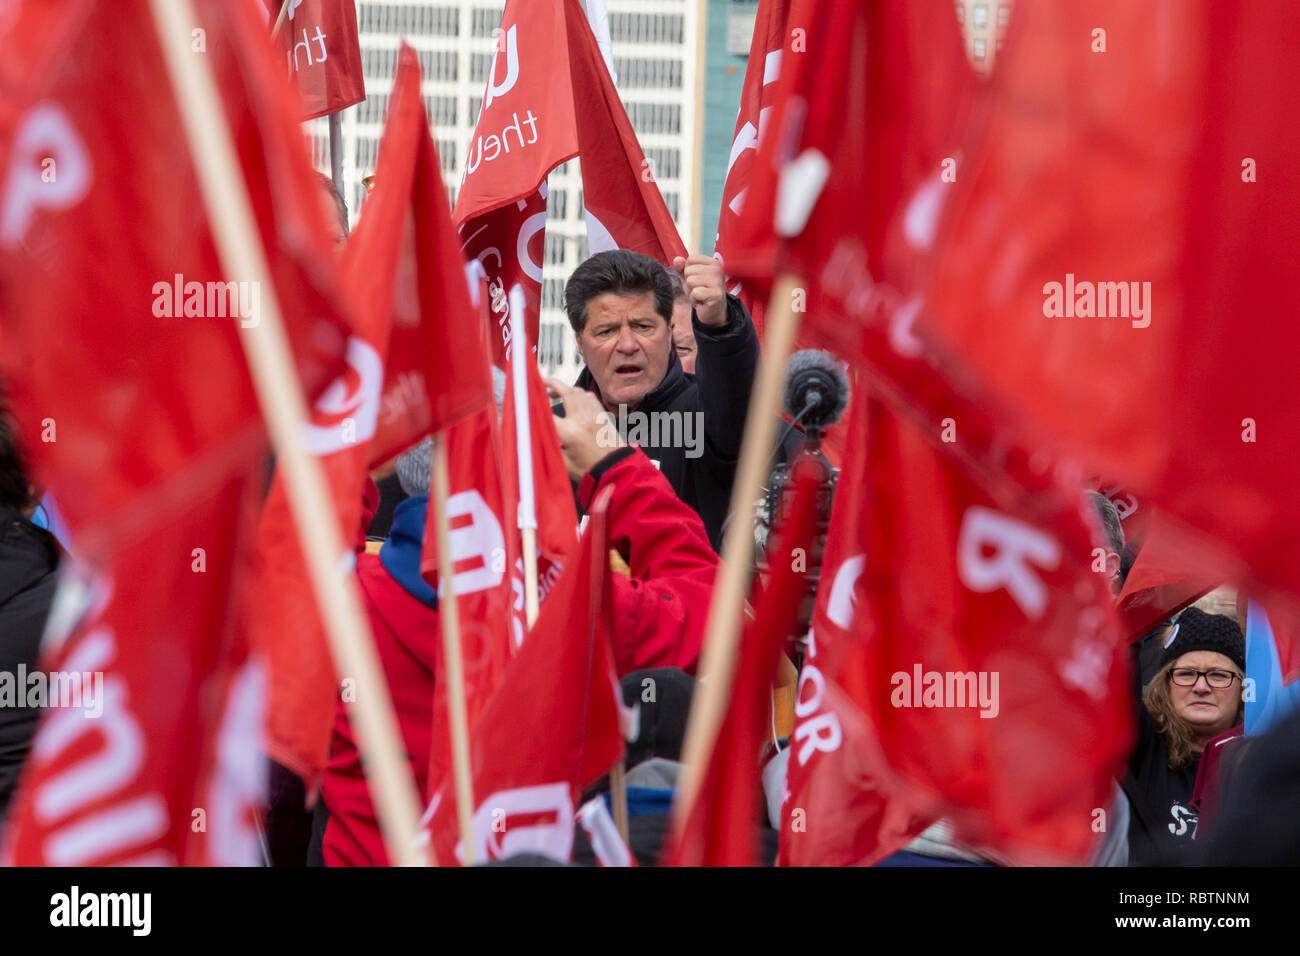 Windsor, Ontario, Canada - 11 January 2019 - Jerry Dias, president of the Unifor labor union which represents Canadian auto workers, speaks at a rally protesting General Motors' planned closing of the Oshawa, Ontario assembly plant. The rally was held across the Detroit River from General Motors headquarters in Detroit. Credit: Jim West/Alamy Live News Stock Photo